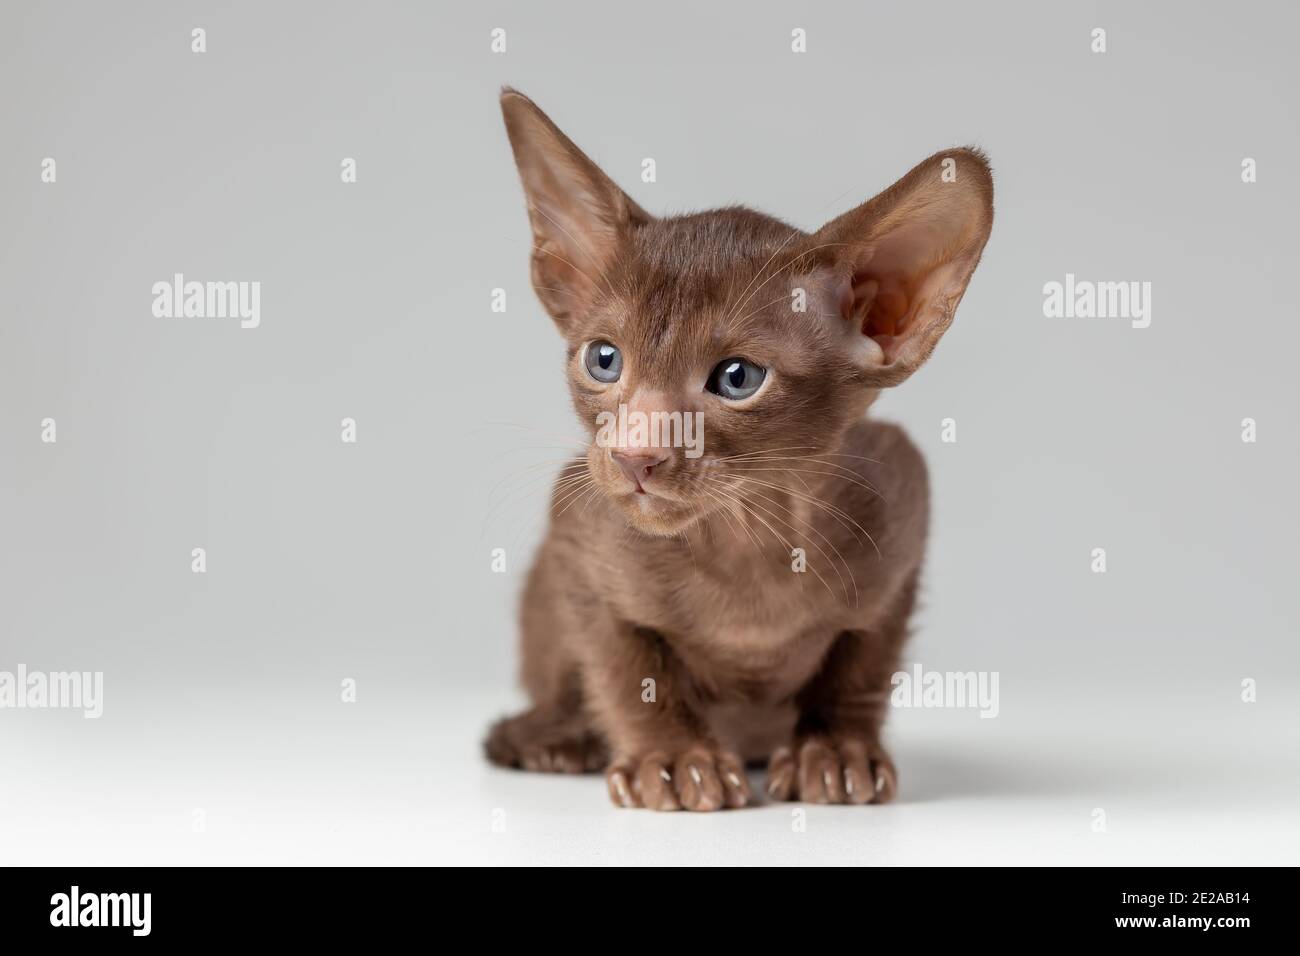 Little kitten of oriental cat breed of solid chocolate brown color with blue eyes is sitting against grey background Stock Photo